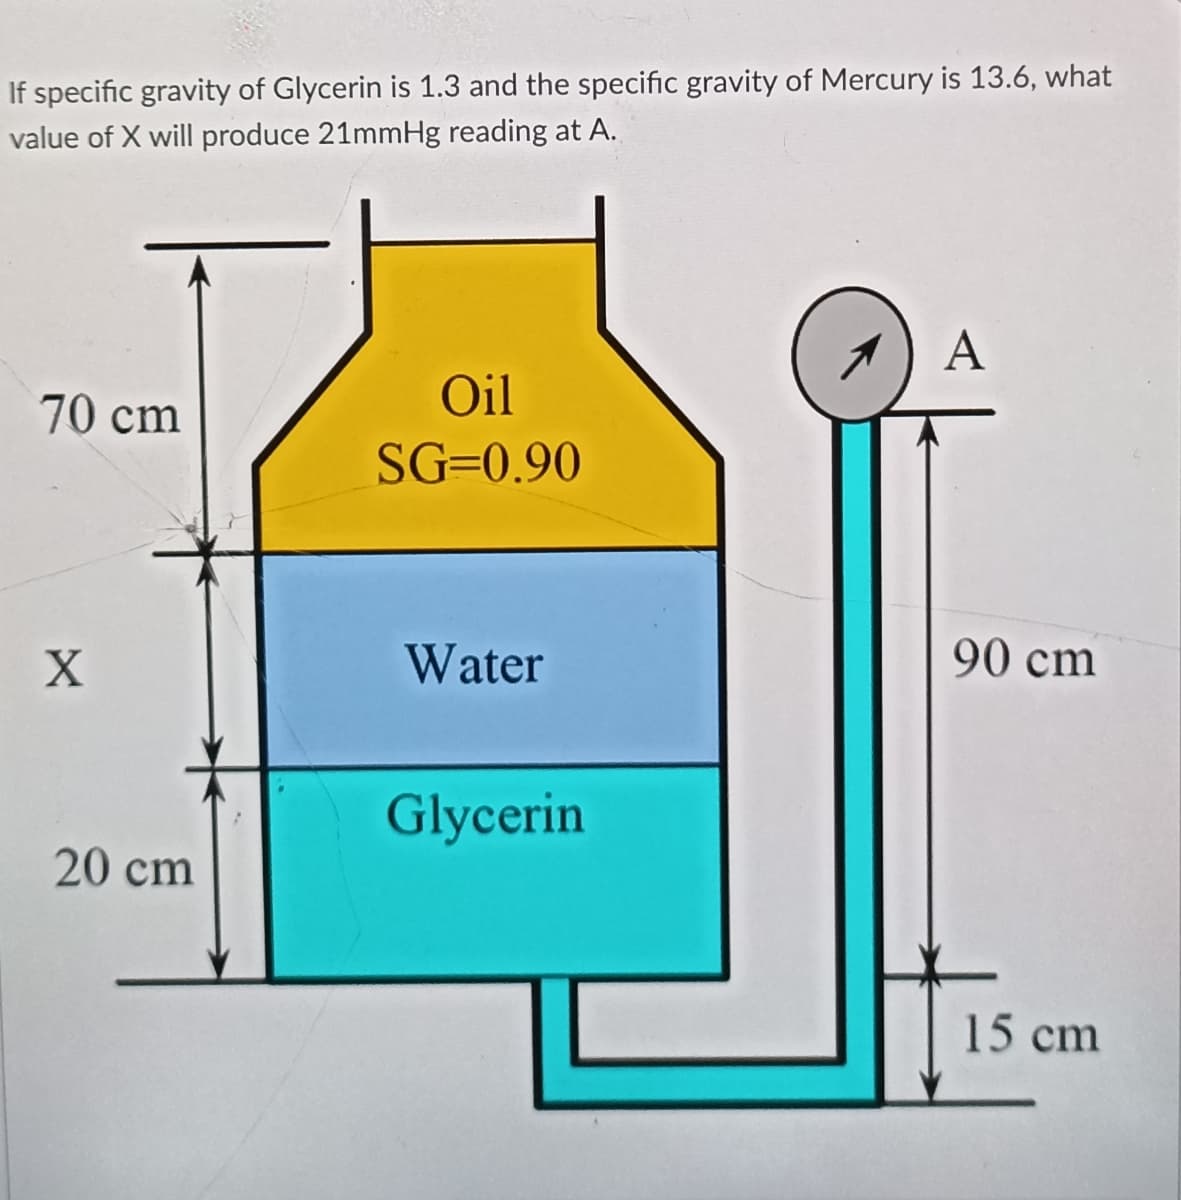 If specific gravity of Glycerin is 1.3 and the specific gravity of Mercury is 13.6, what
value of X will produce 21mmHg reading at A.
A
70 cm
Oil
SG=0.90
Water
90 cm
Glycerin
20 cm
15 cm
